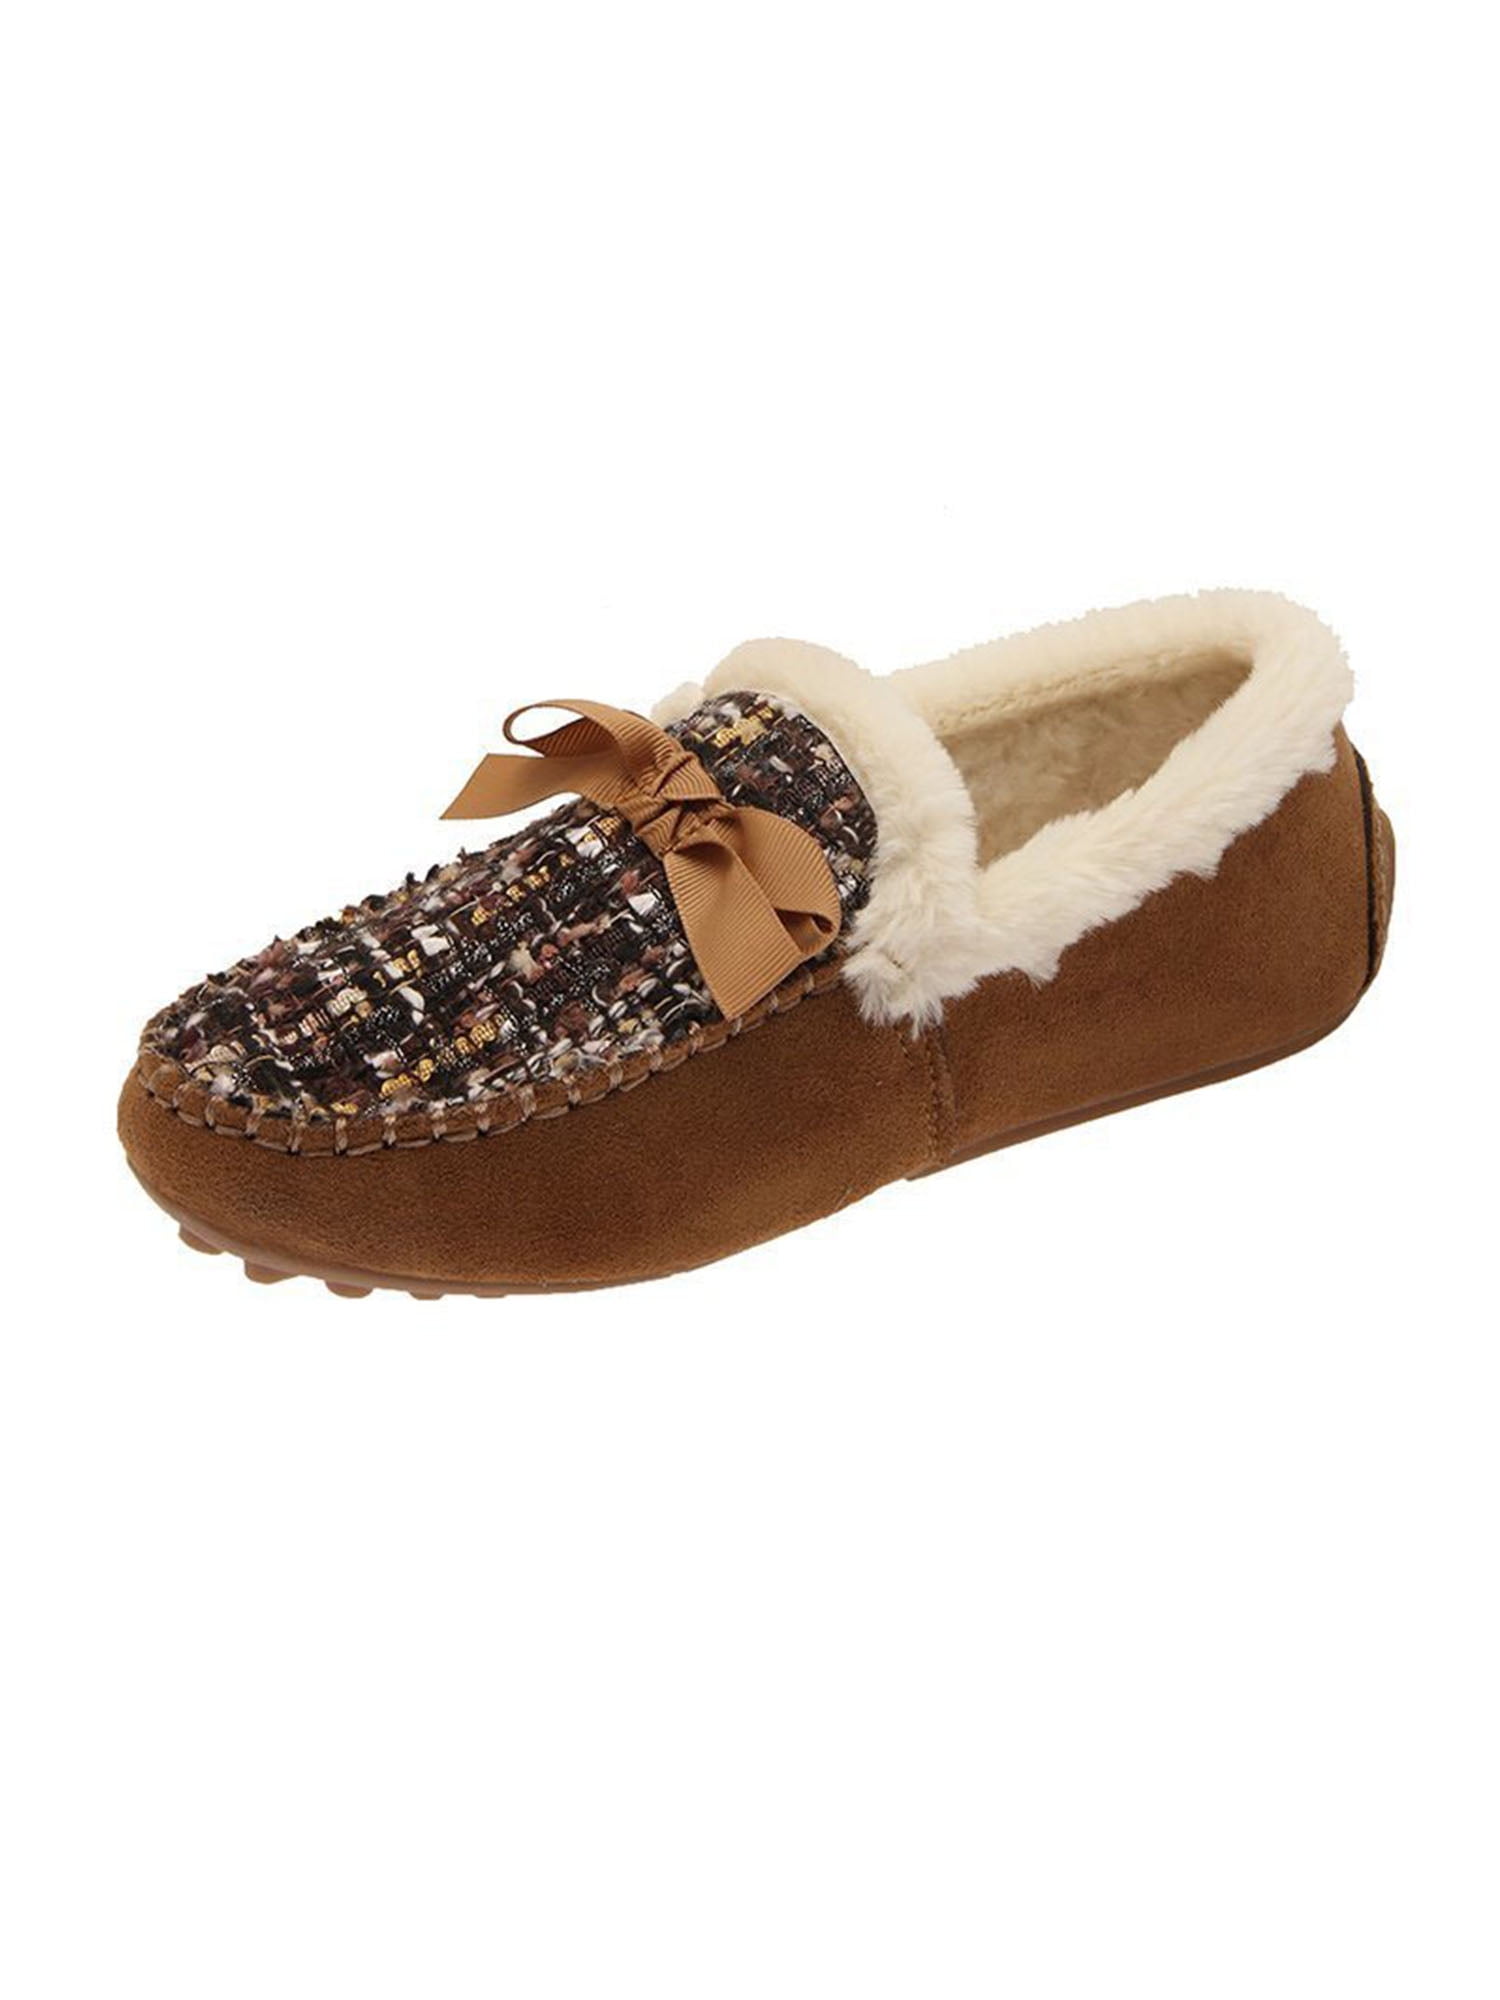 Moonbeams Tan Brown Quilted Moccasin Slippers for Women Soft Fuzzy Micro Terry 